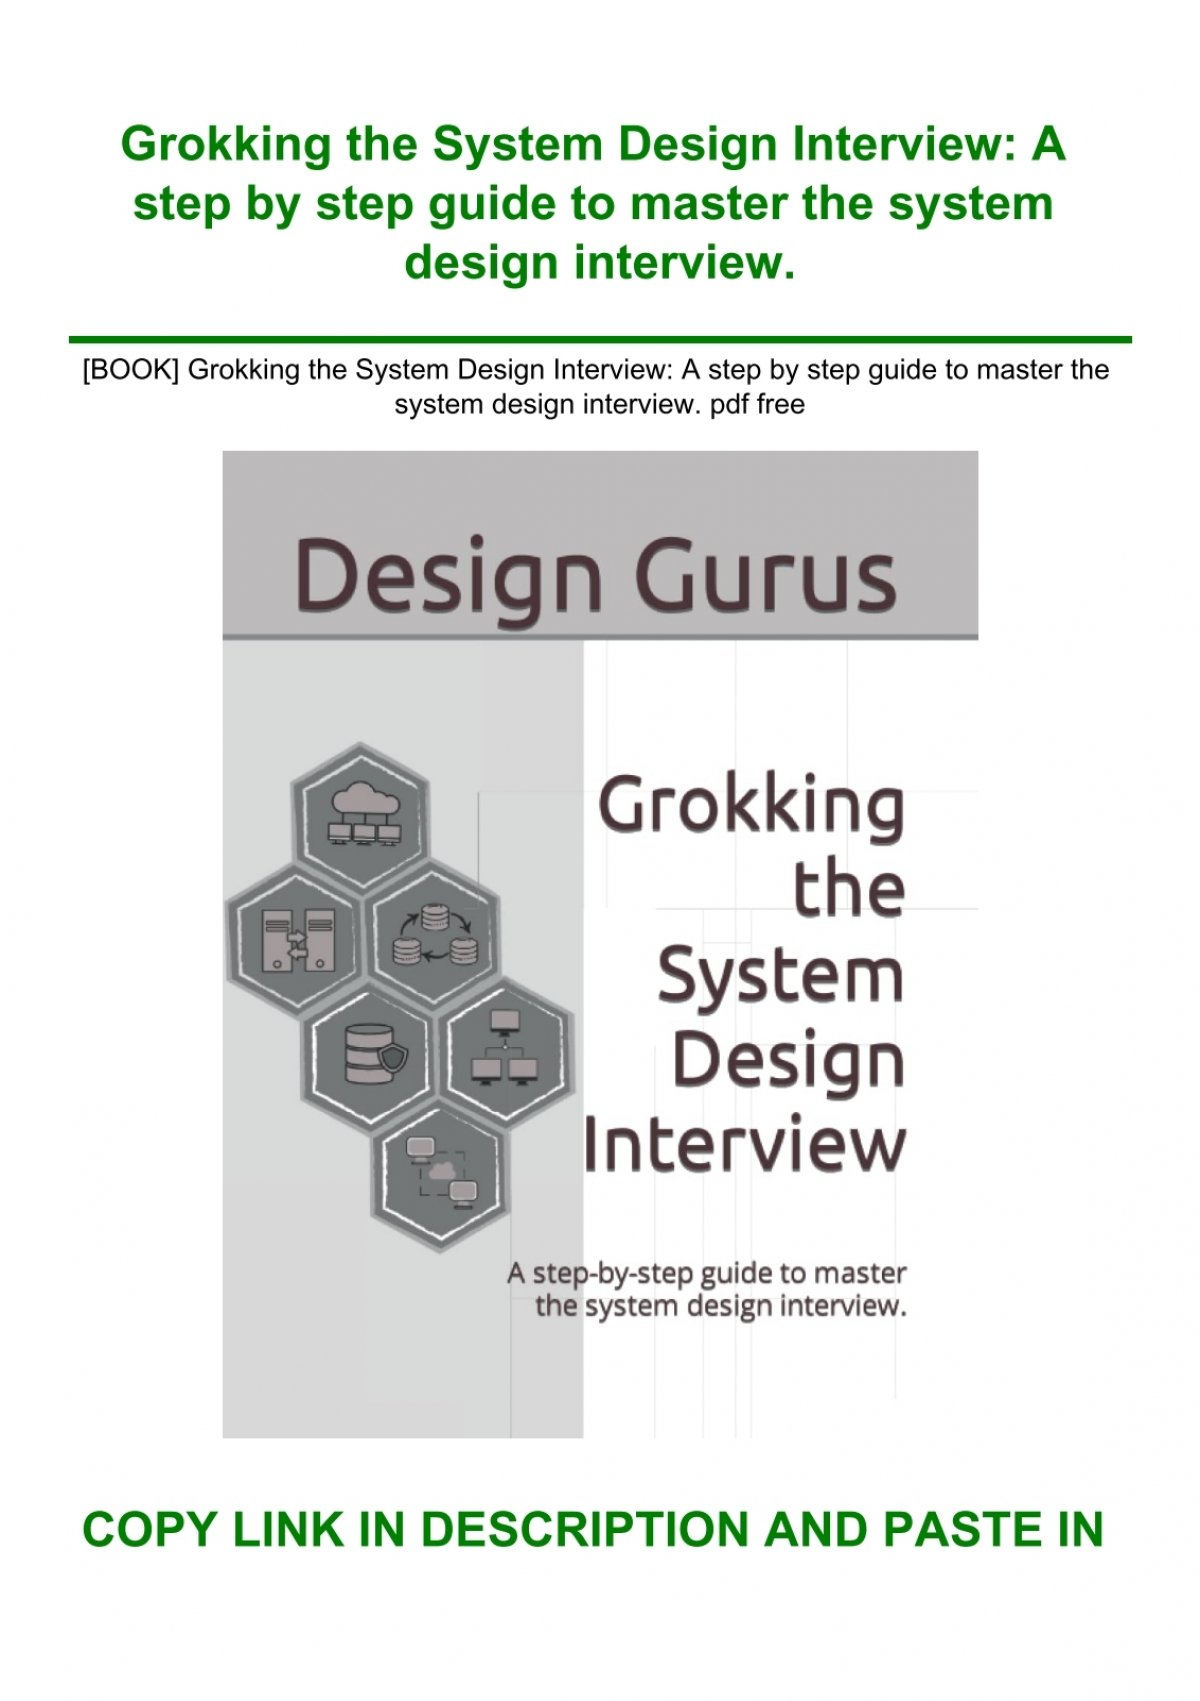 grokking modern system design interview for engineers